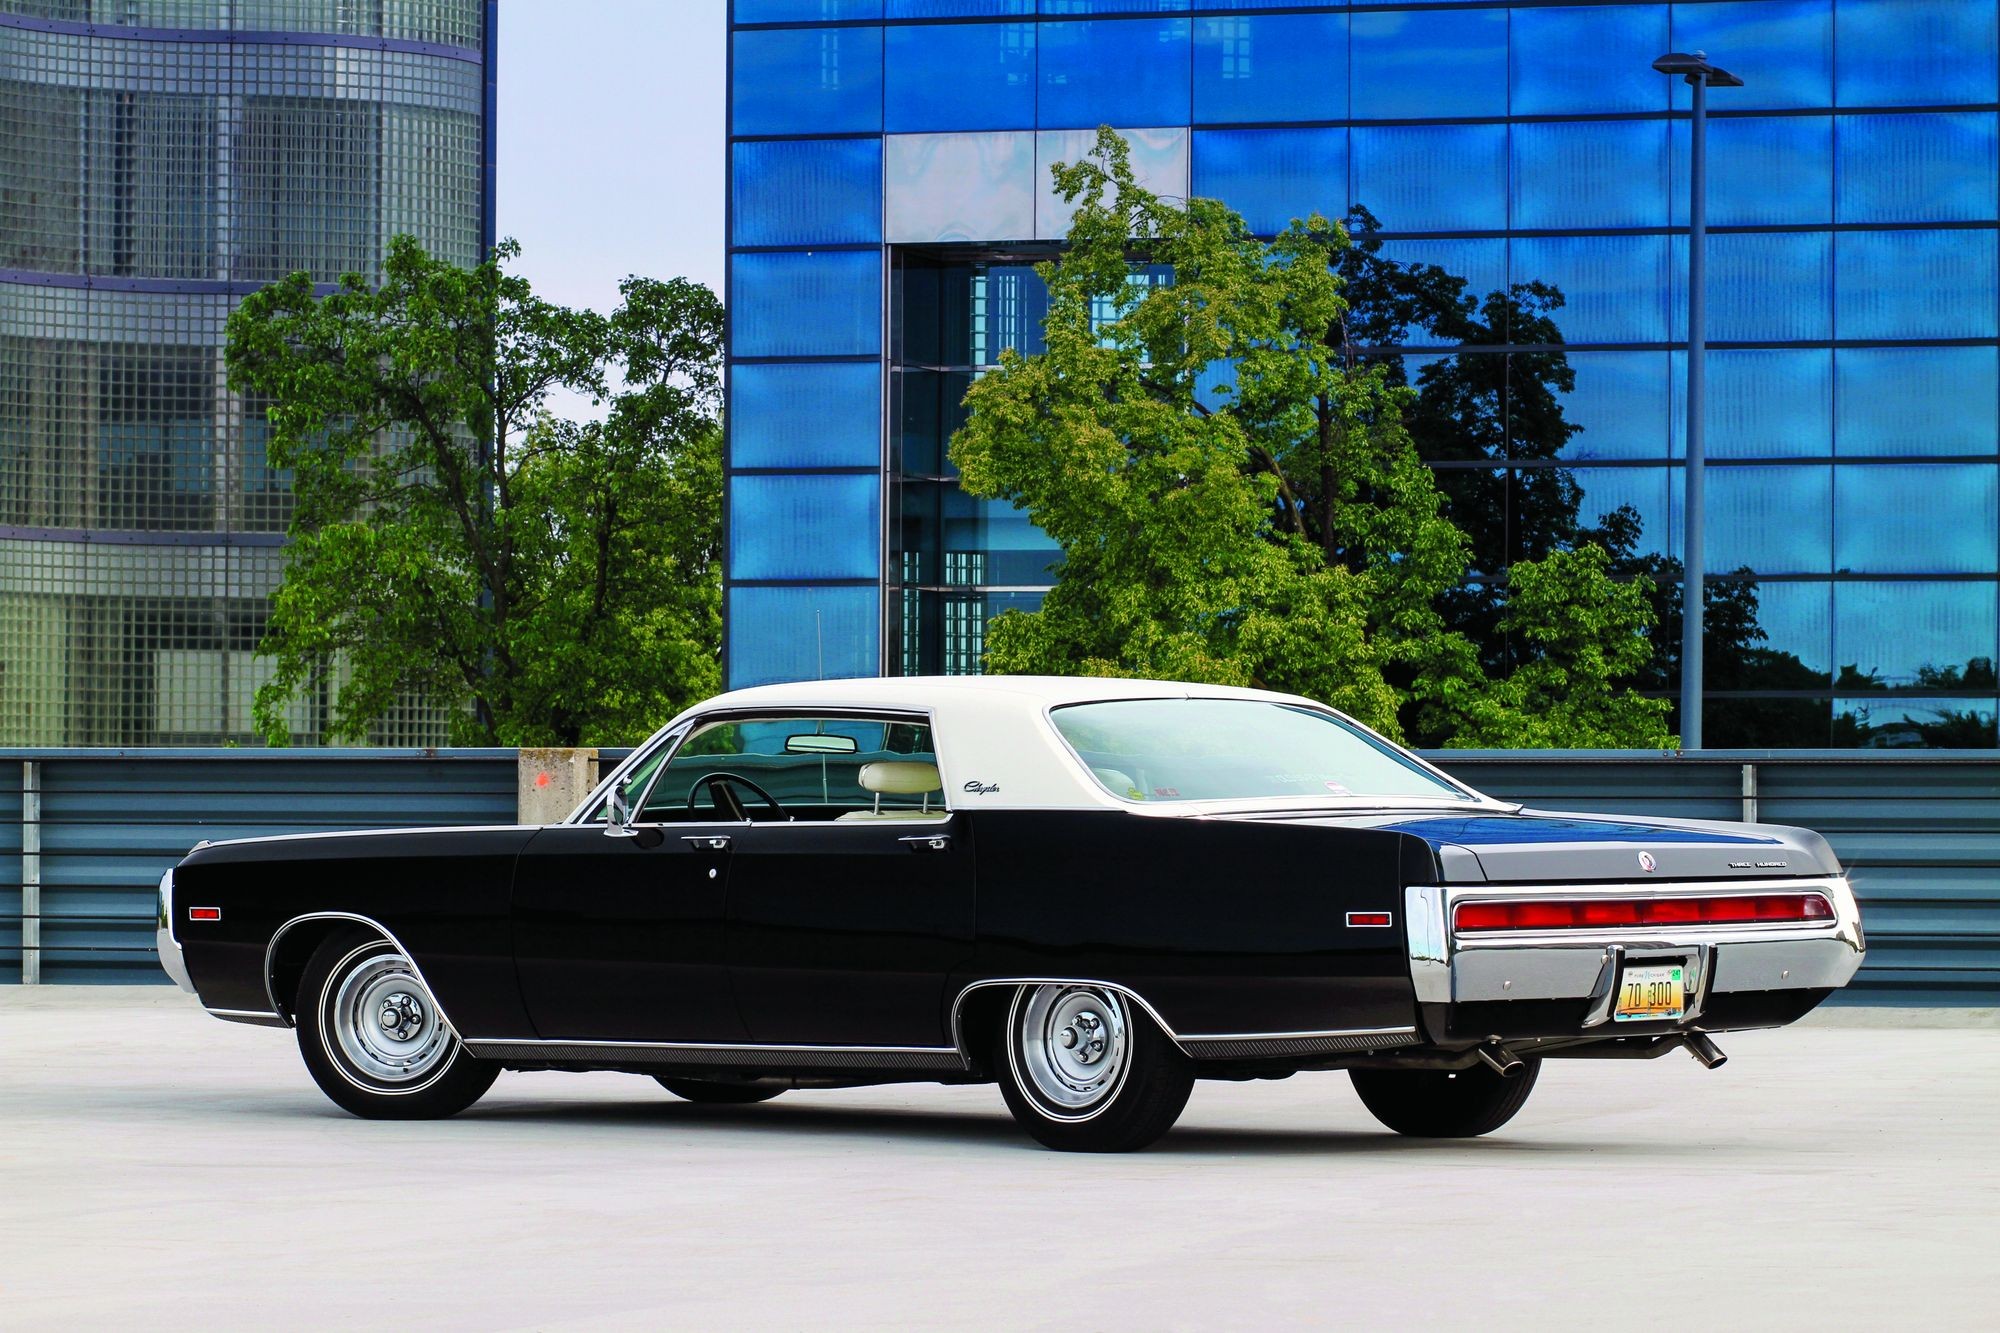 Affection For The 1970 Chrysler 300's Modern Styling Hasn't Waned for 50 Years